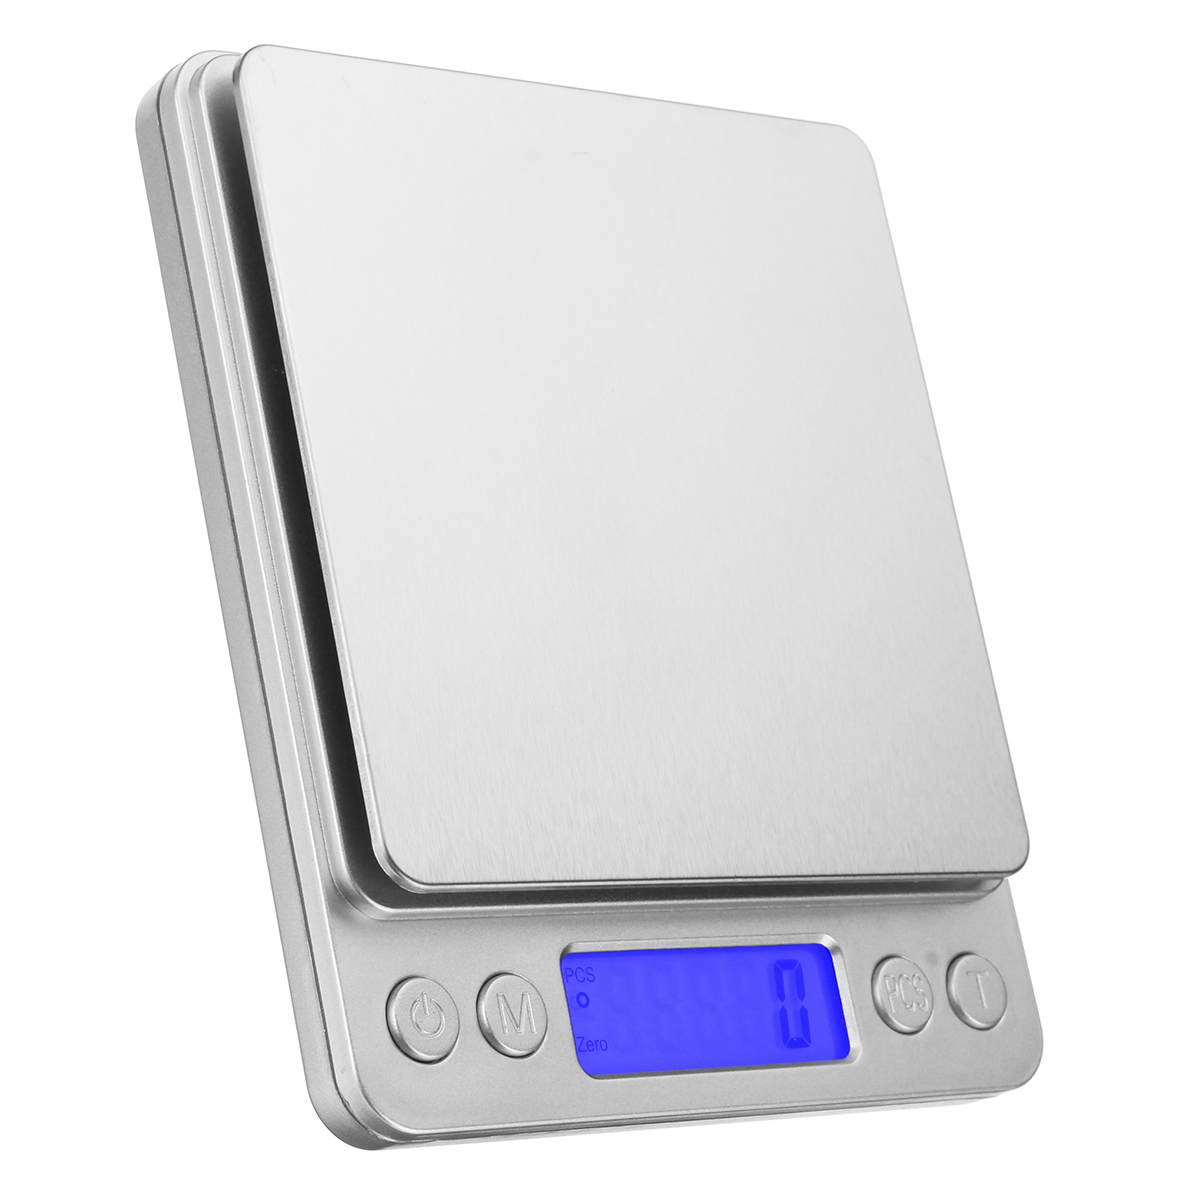 

3KG Digital LCD Electronic Kitchen Scale Postal Cooking Food